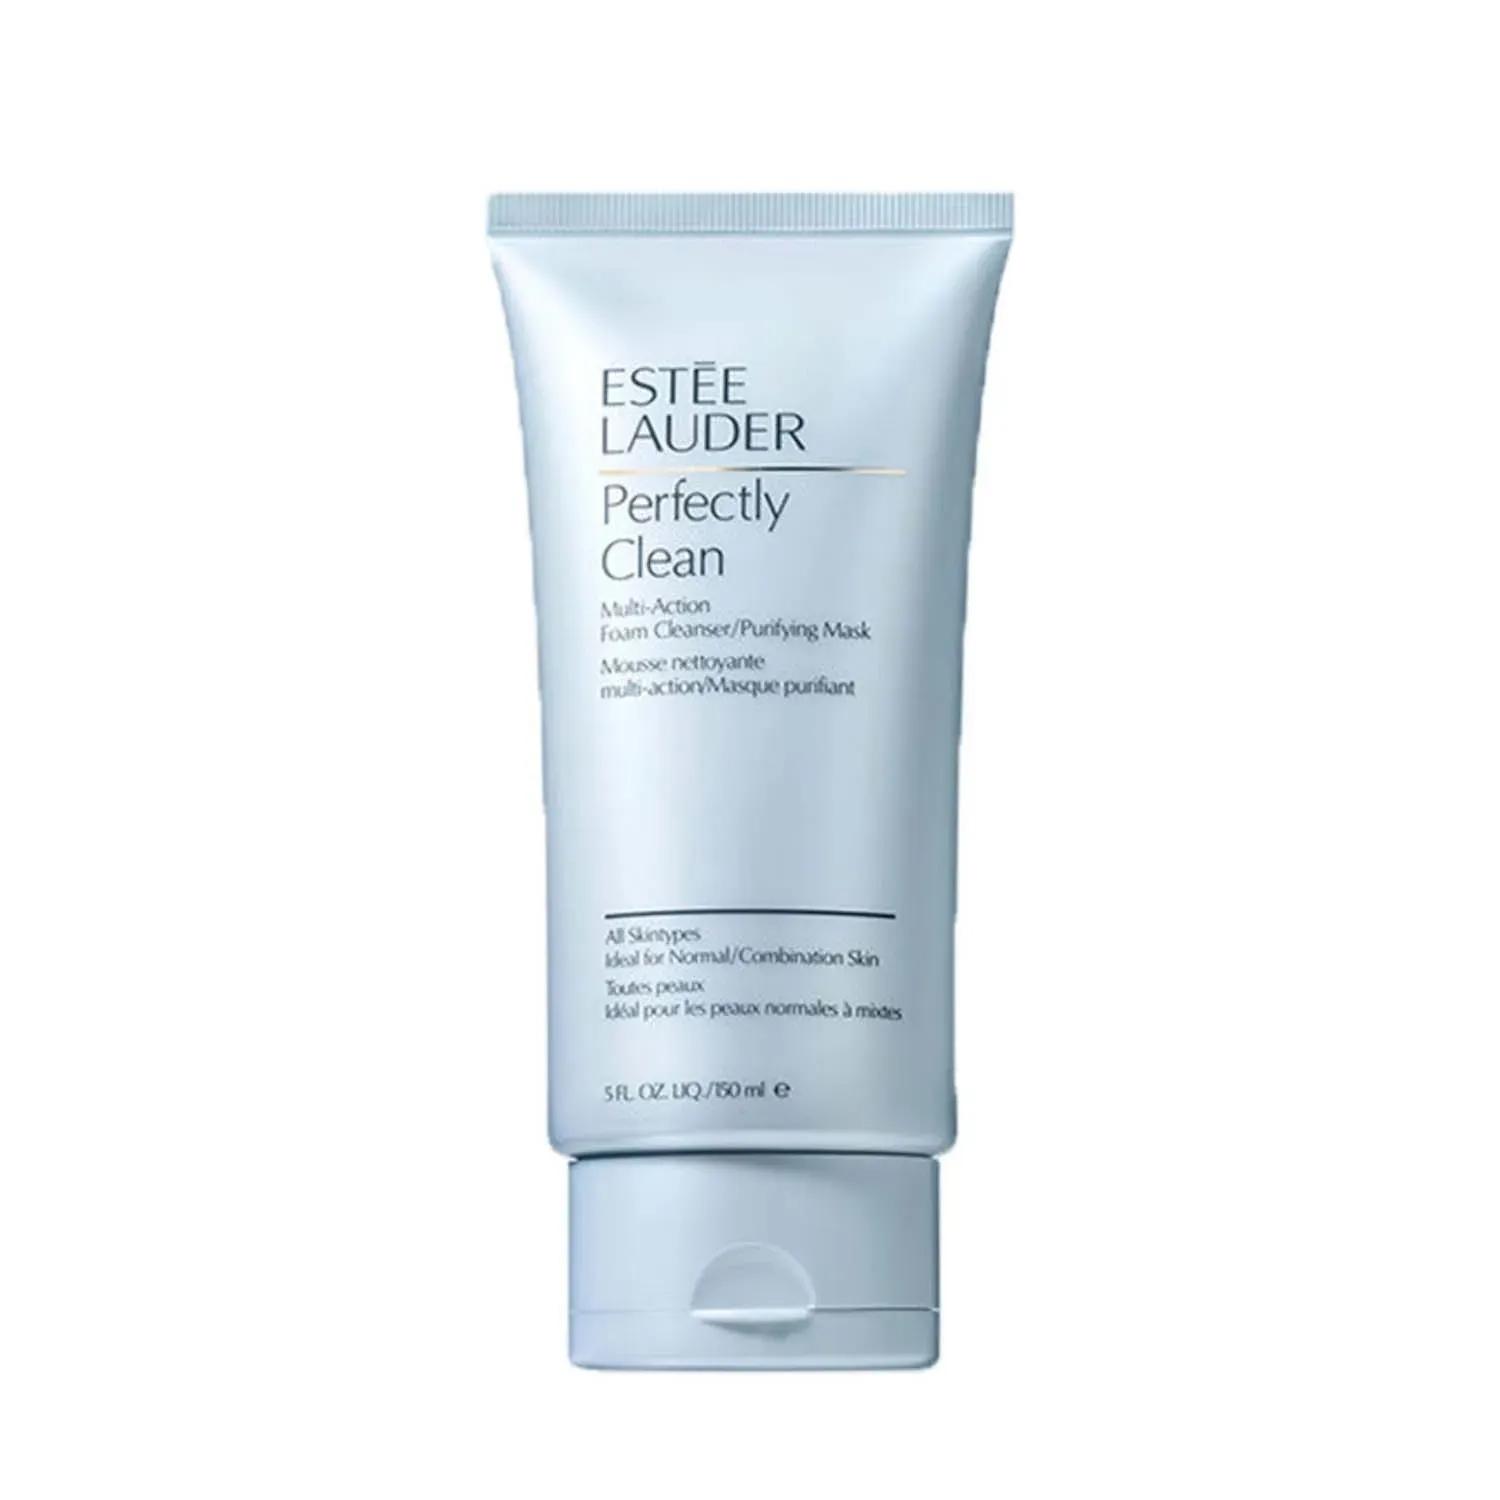 estee lauder perfectly clean multi action foam cleanser + purifying mask - (150ml)